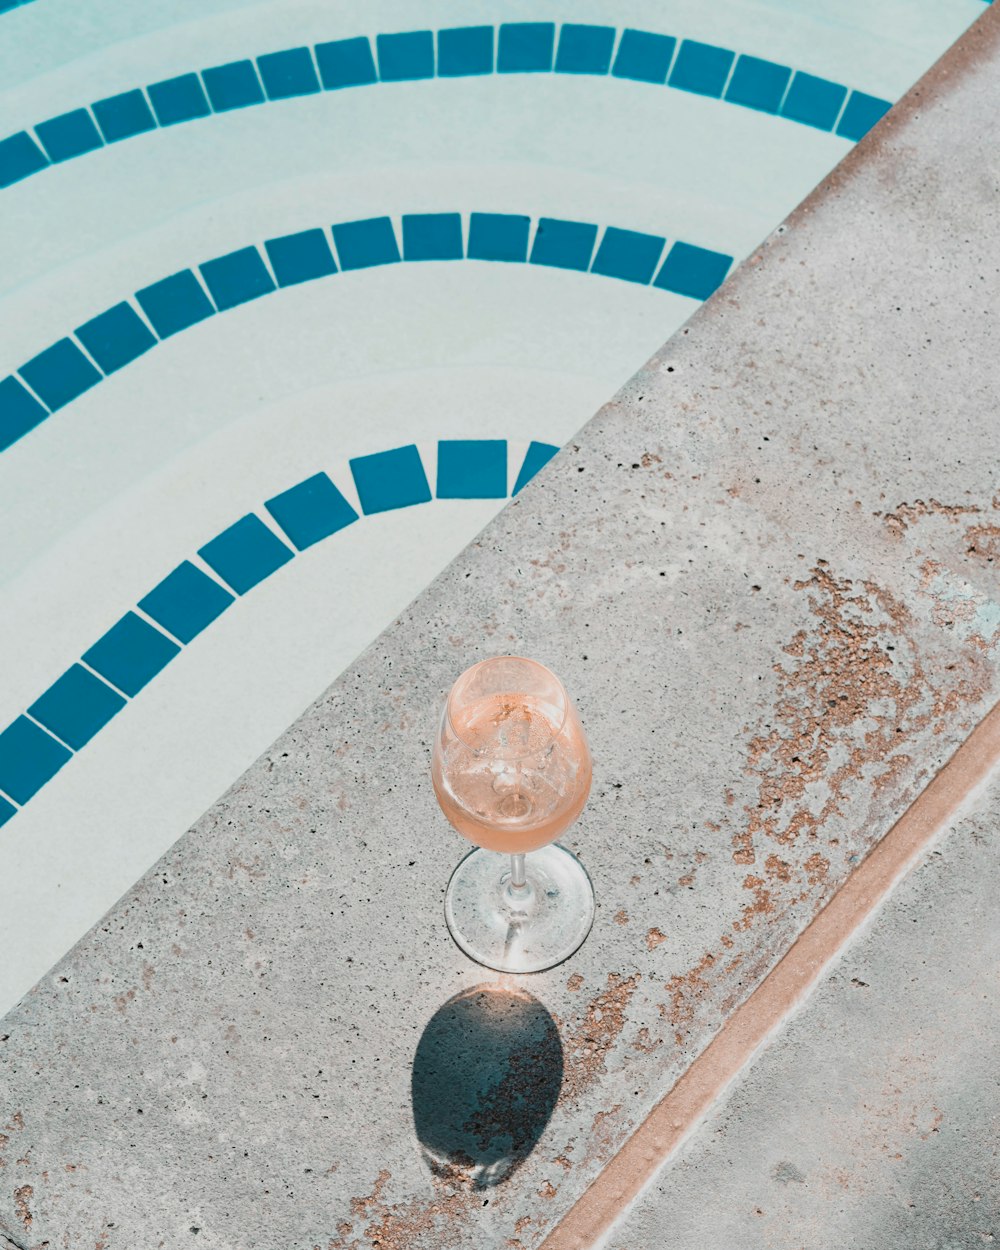 a glass of wine sitting next to a swimming pool